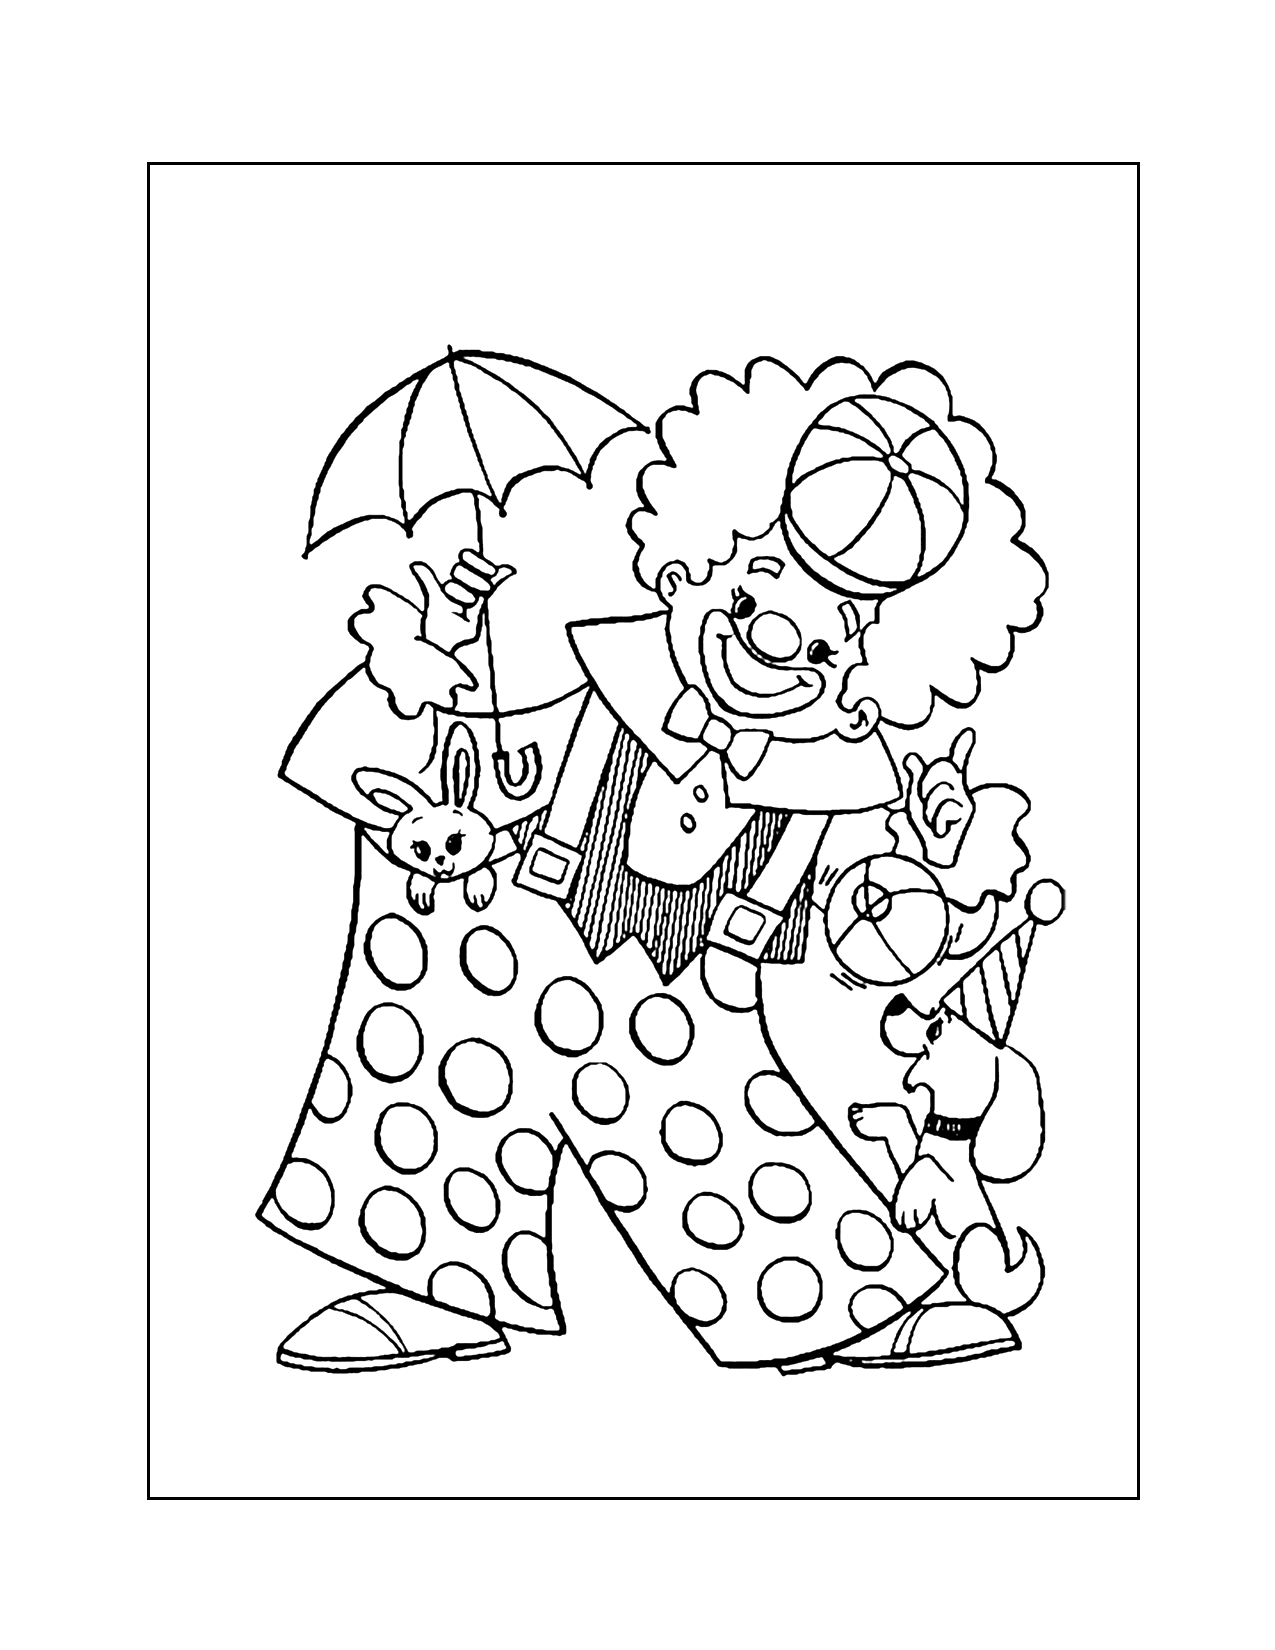 Clown Rabbit And Puppy Coloring Page